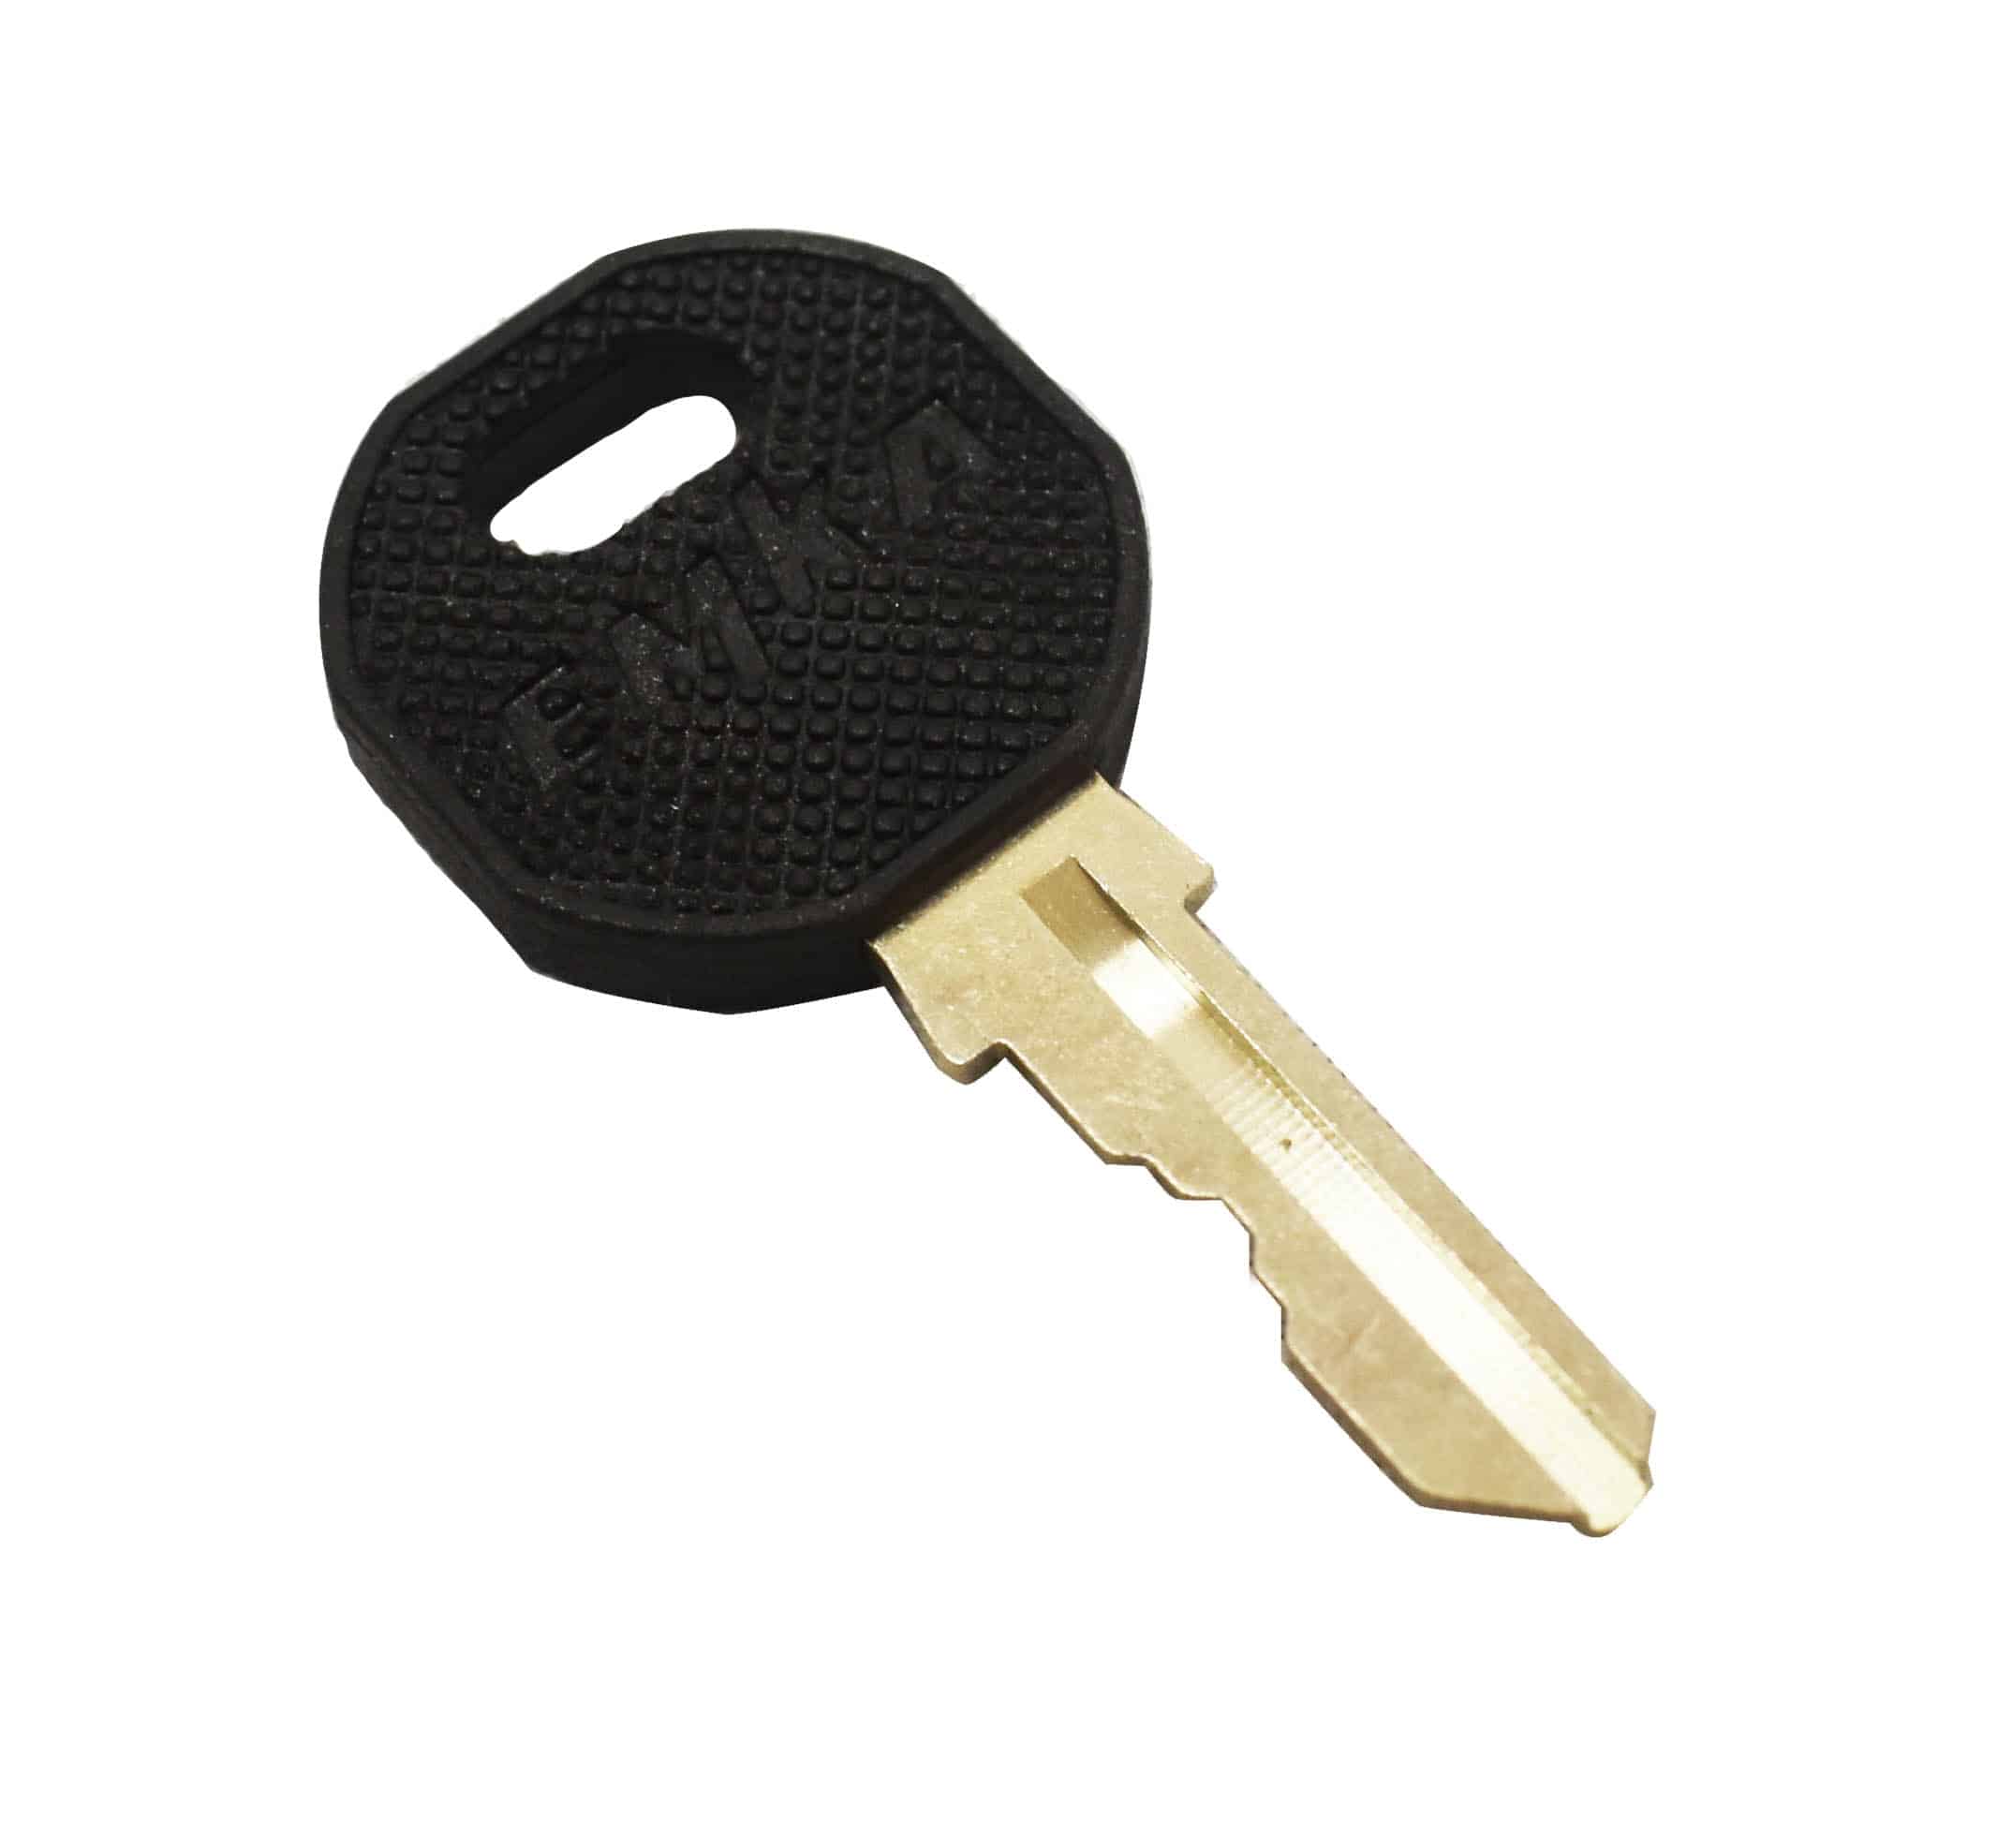 Replacement key for folded paper towel dispenser